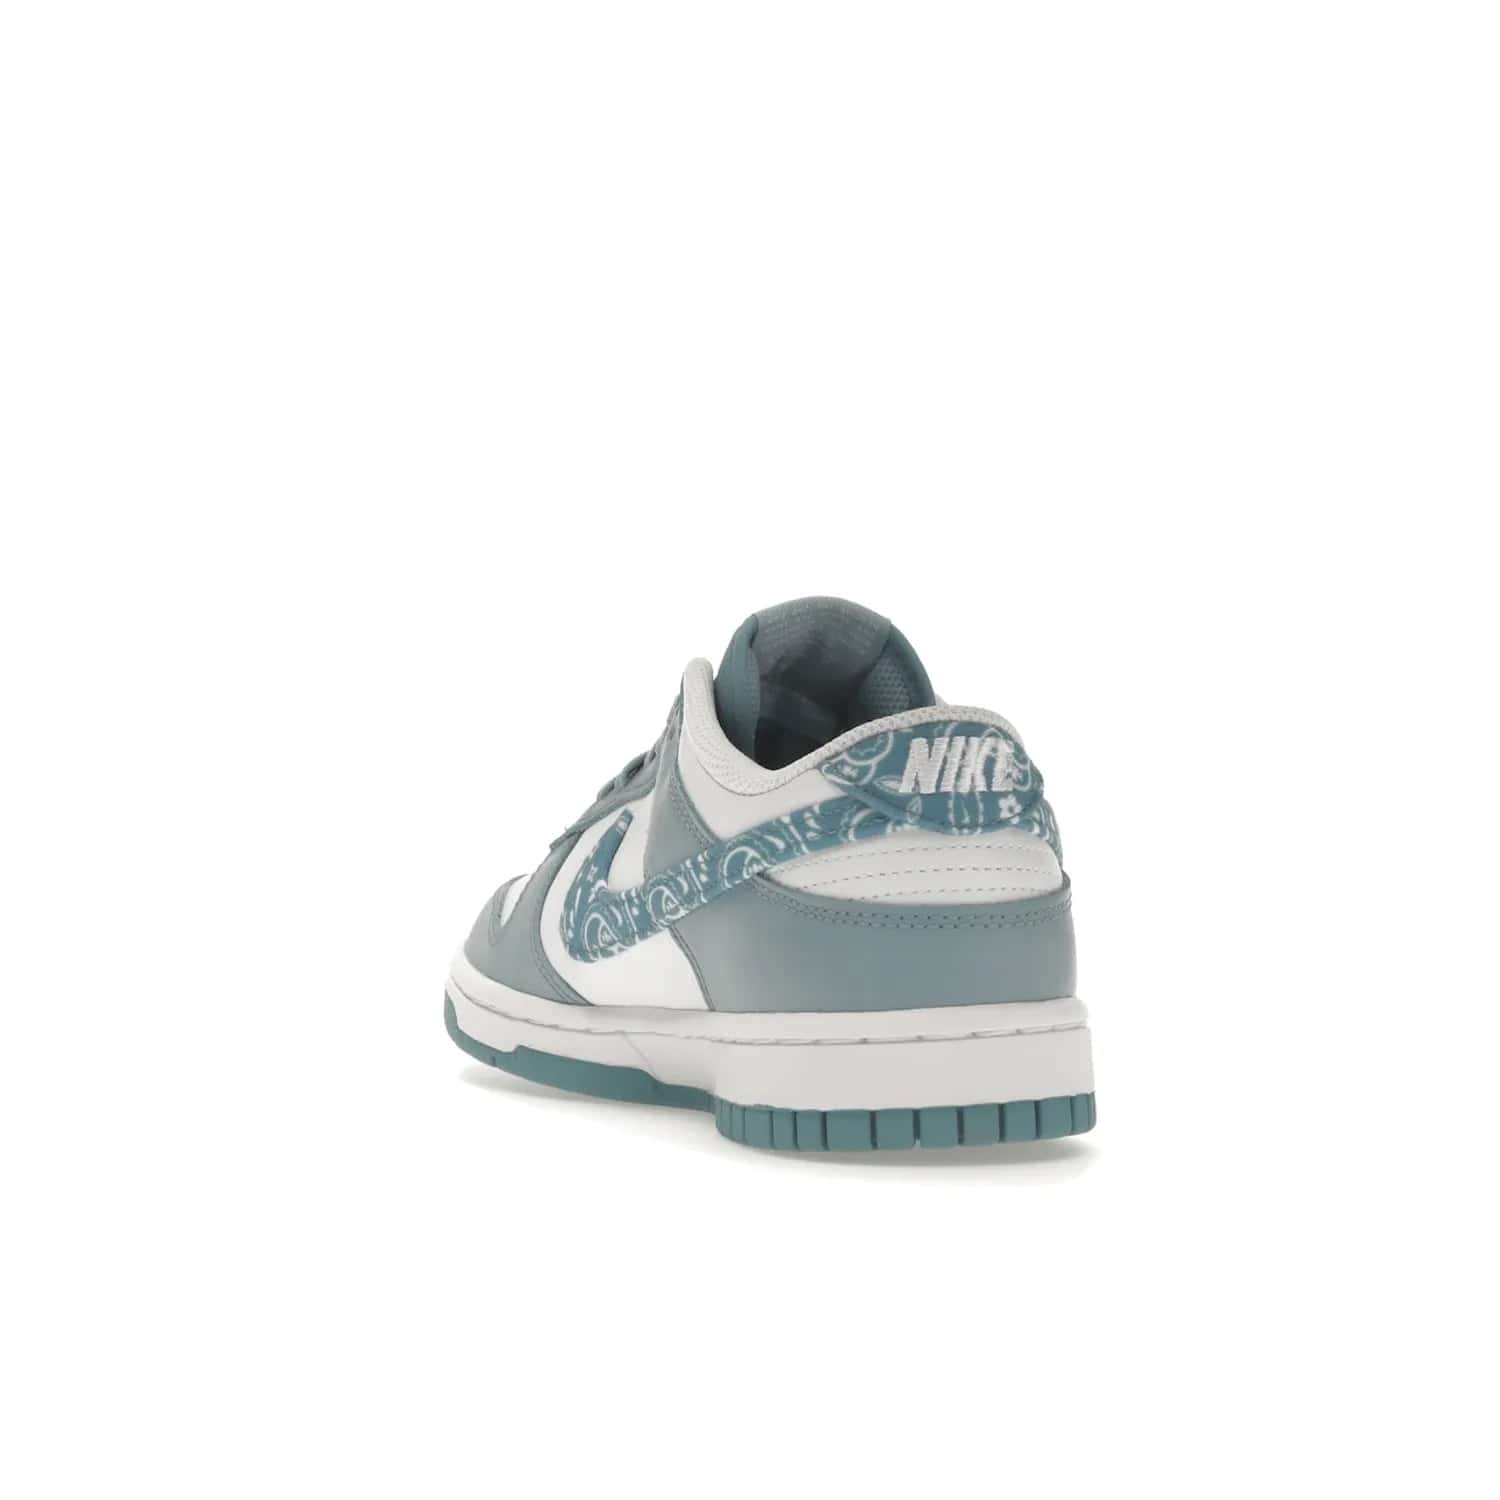 Nike Dunk Low Essential Paisley Pack Worn Blue (Women's) - Image 26 - Only at www.BallersClubKickz.com - Get the Nike Dunk Low Essential Paisley Pack Worn Blue (Women's) for style and comfort. White leather construction, light blue leather overlays, canvas Swooshes and matching heel tabs offer a rich blue hue. Finished by a white and light blue sole, this classic Nike Dunk is the perfect addition to any wardrobe. Released in March 2022.